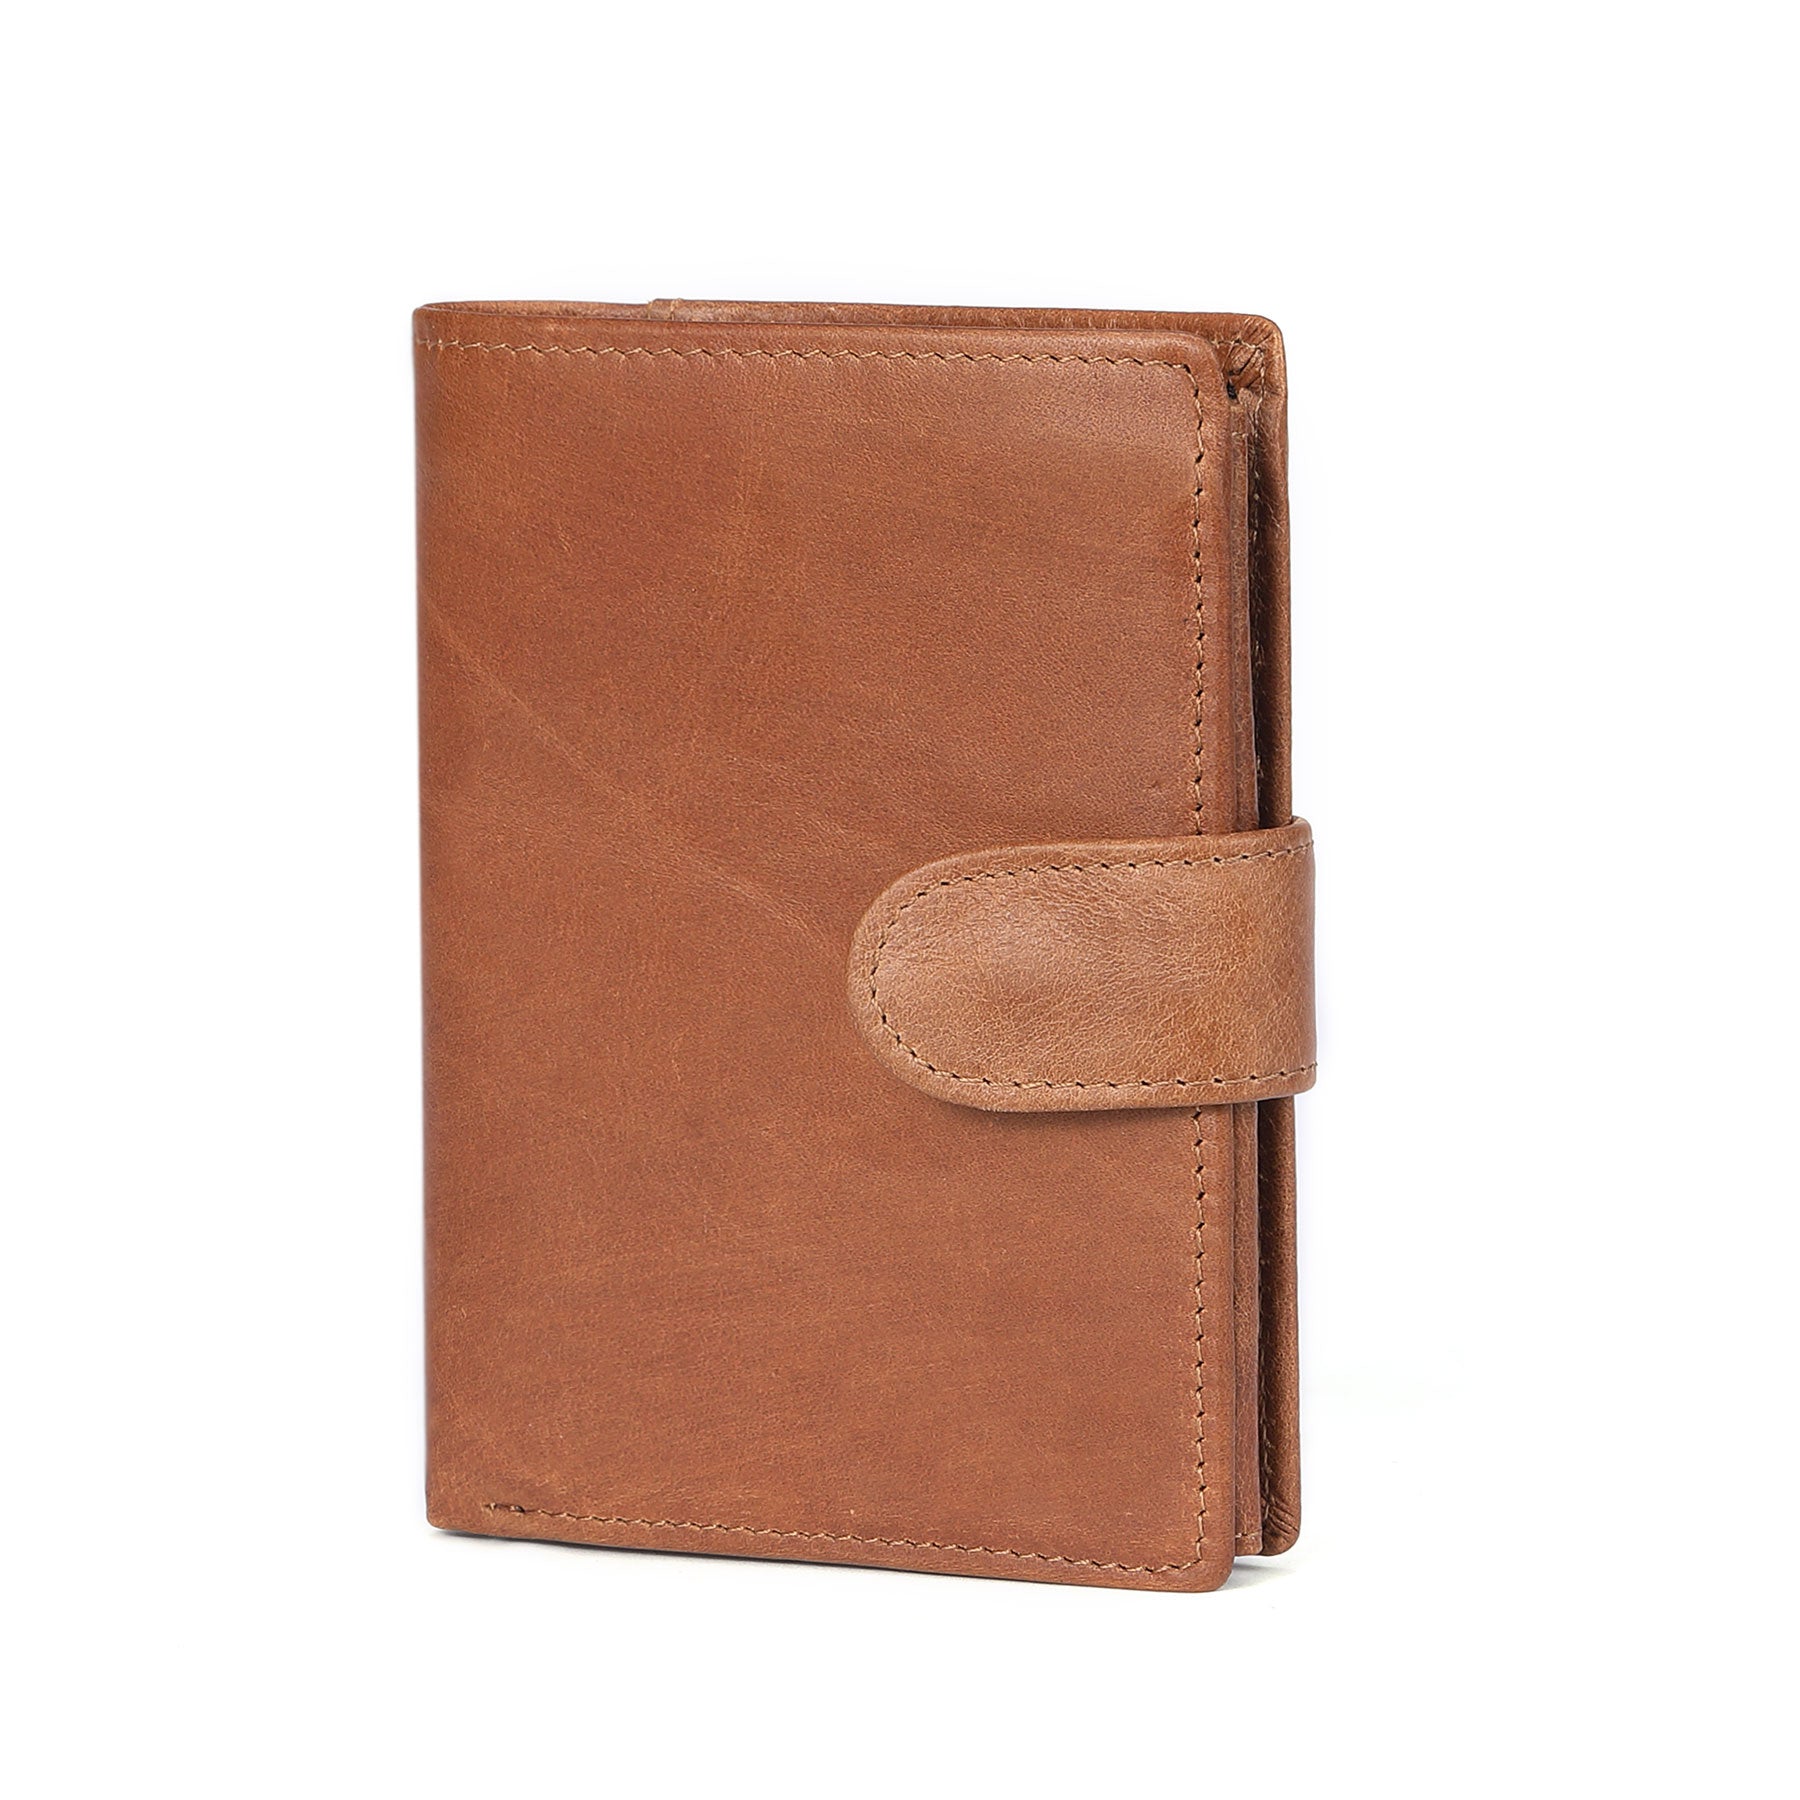 Exclusive Leather Coin Pocket Wallet Men woyaza